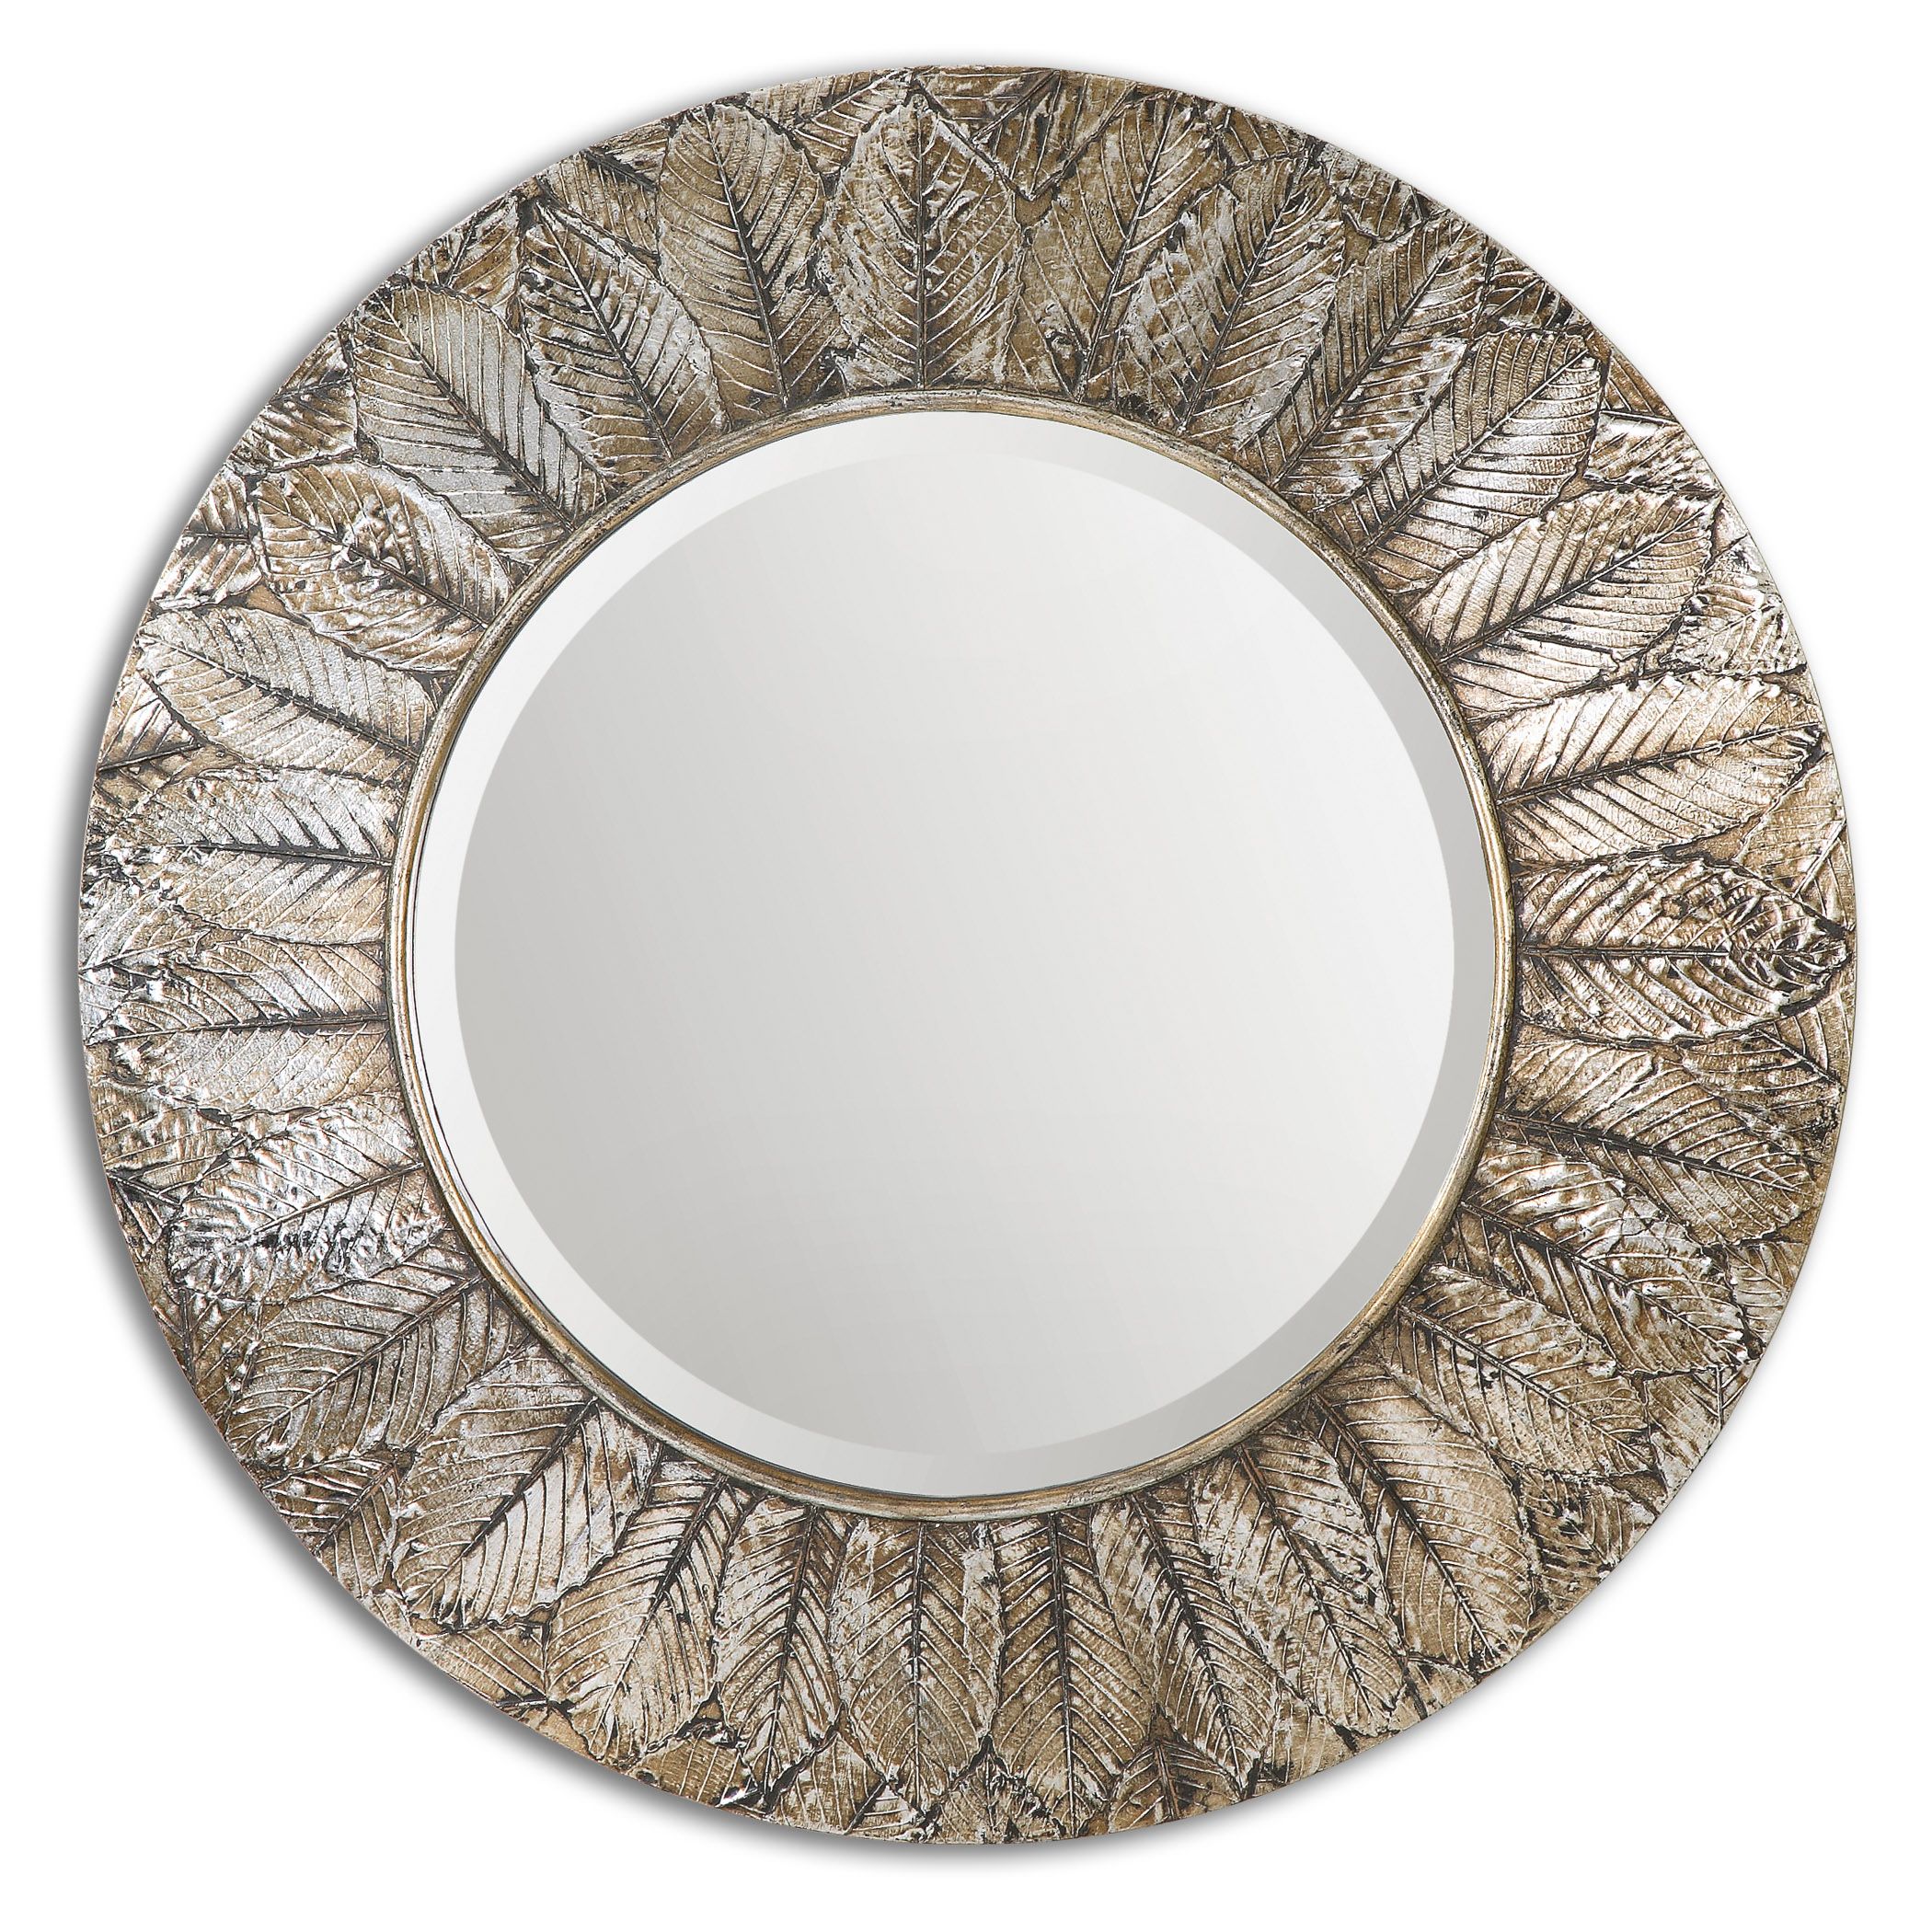 Uttermost Foliage Round Silver Leaf Mirror With Regard To Gold Leaf Floor Mirrors (View 14 of 15)